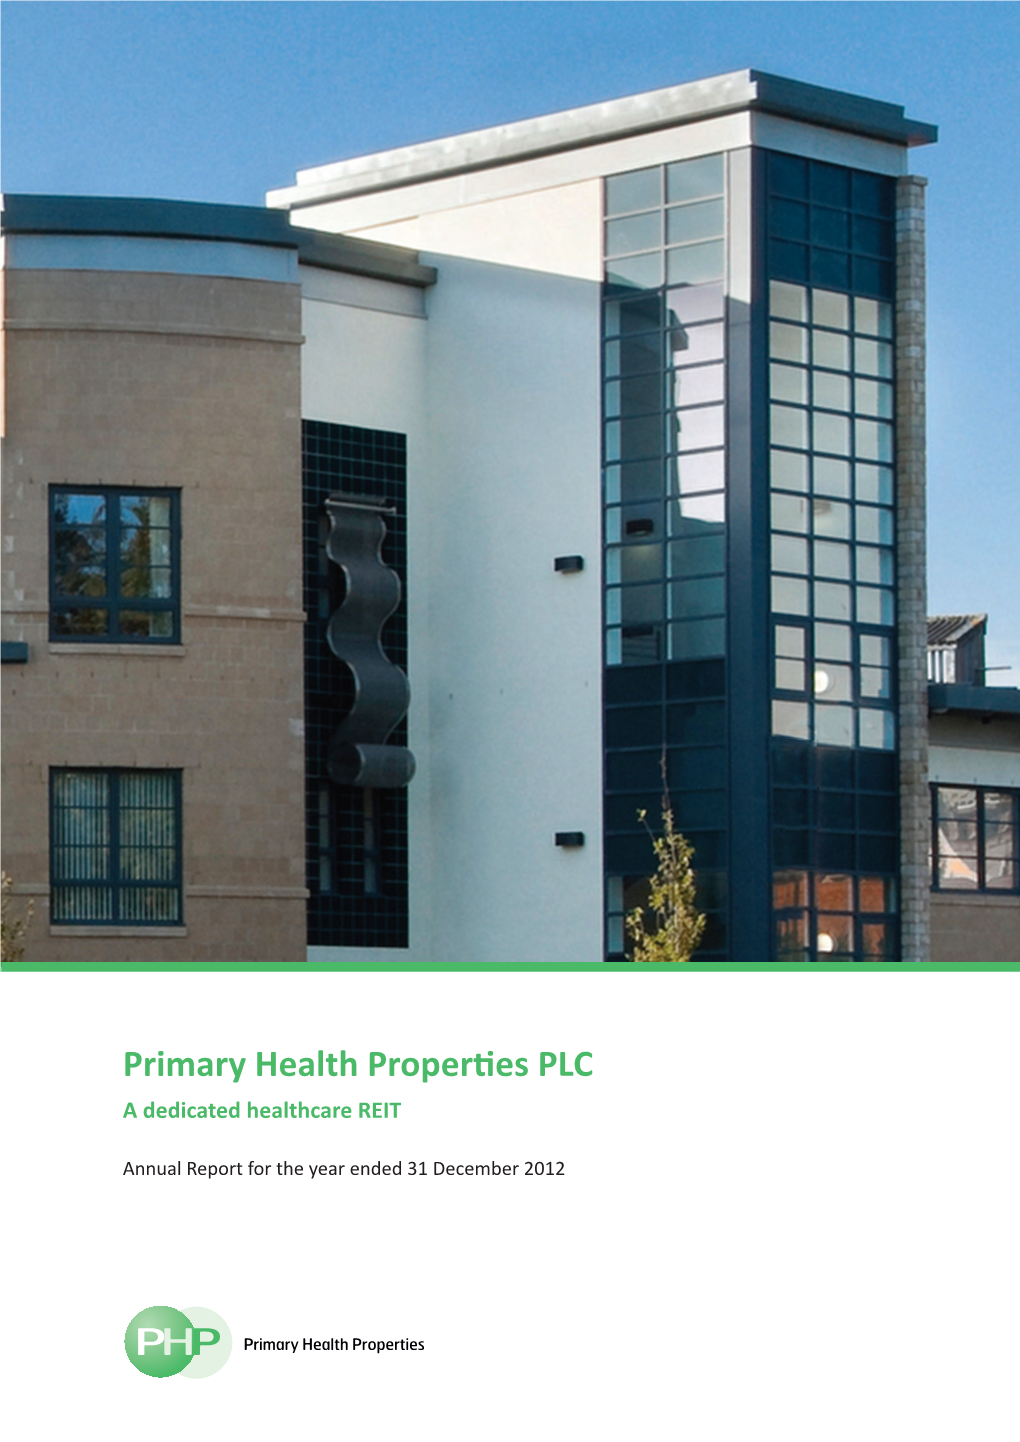 Primary Health Properties PLC (“PHP”) Is a UK Real Estate Investment Trust (“REIT”)